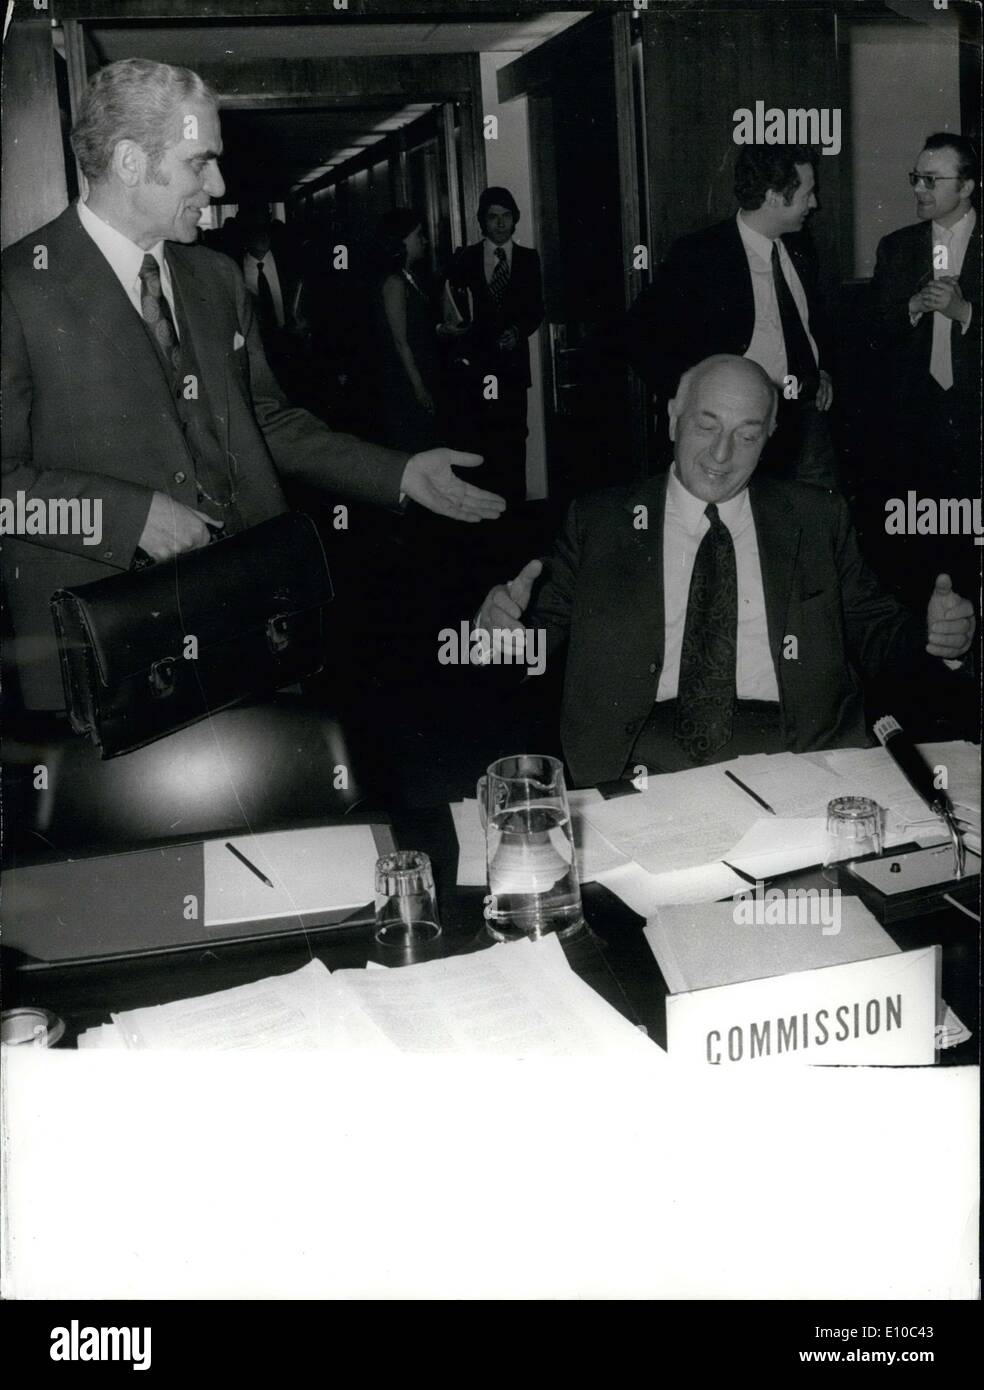 Mar. 23, 1972 - A compromise between Paris and Bonn was reached in Brussels last night regarding the differences that separate Germany's Minister of Agriculture, Mr. Ertl, and his French counterpart Michel Cointat. The compromise deals with changes that need to be made relative to progressive suppression of compensatory taxes on European agricultural exchanges. Sicco Mansholt, new President of the Consortium for Energy Efficiency (right) is pictured with Mr. Buescler, who is representing Luxembourg. Stock Photo